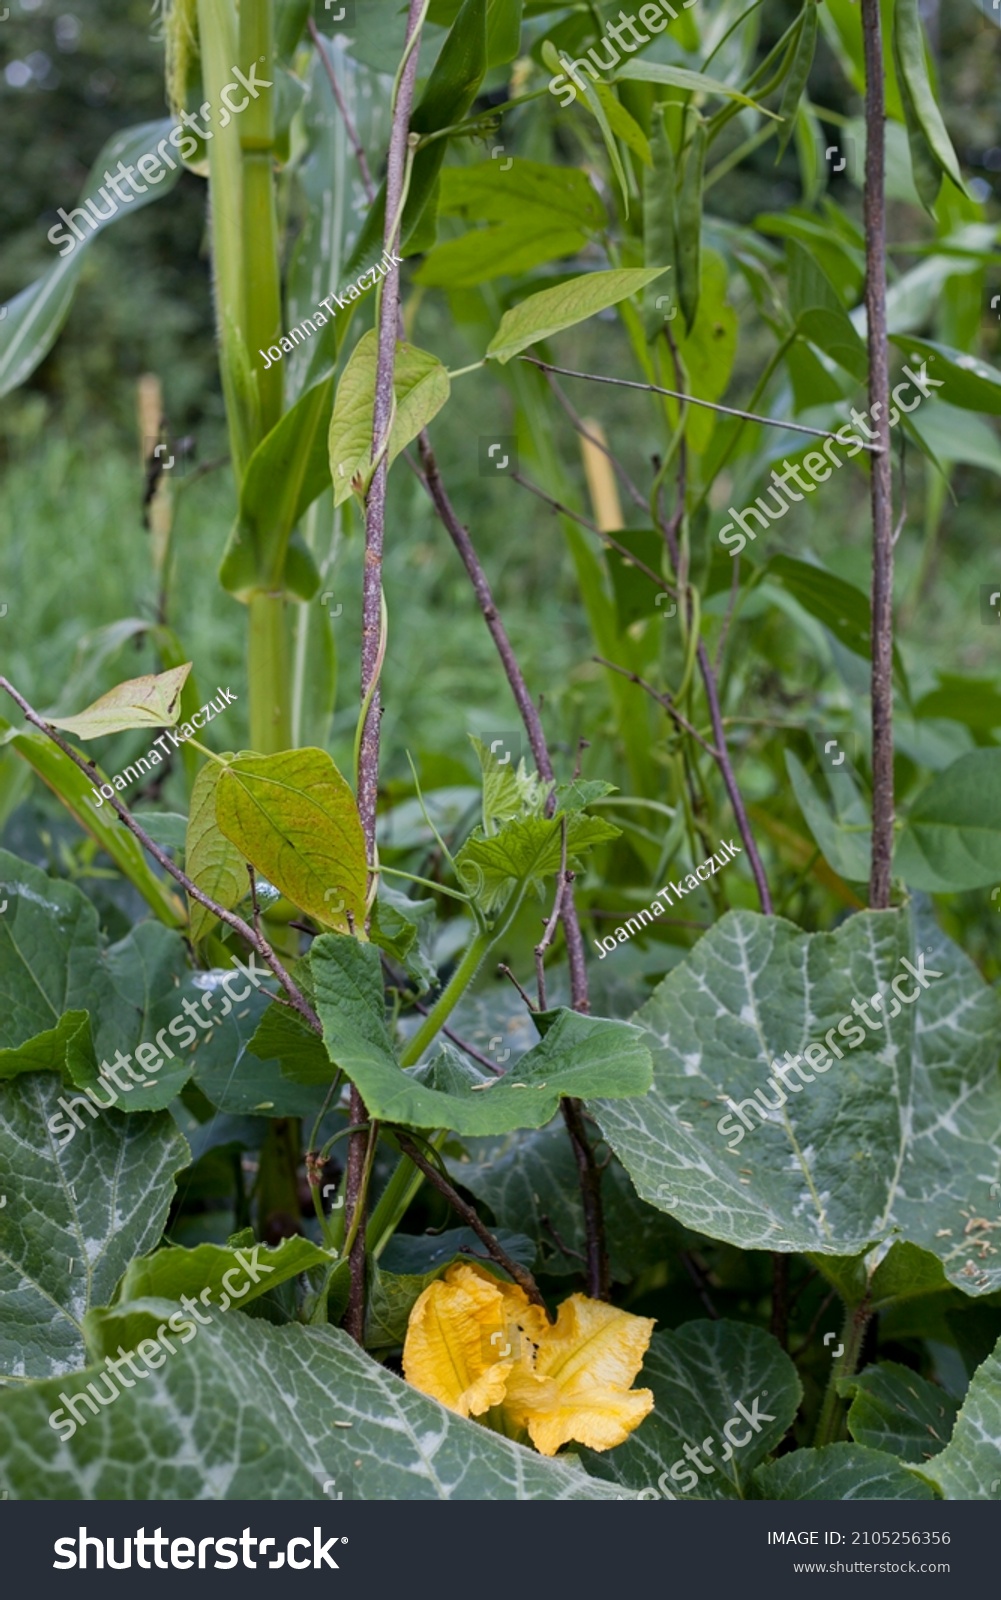 Three sisters companion planting  - beans with green pods climbing corn flower, pumpkins and squashes are shading the ground in the wild vegetable garden. #2105256356